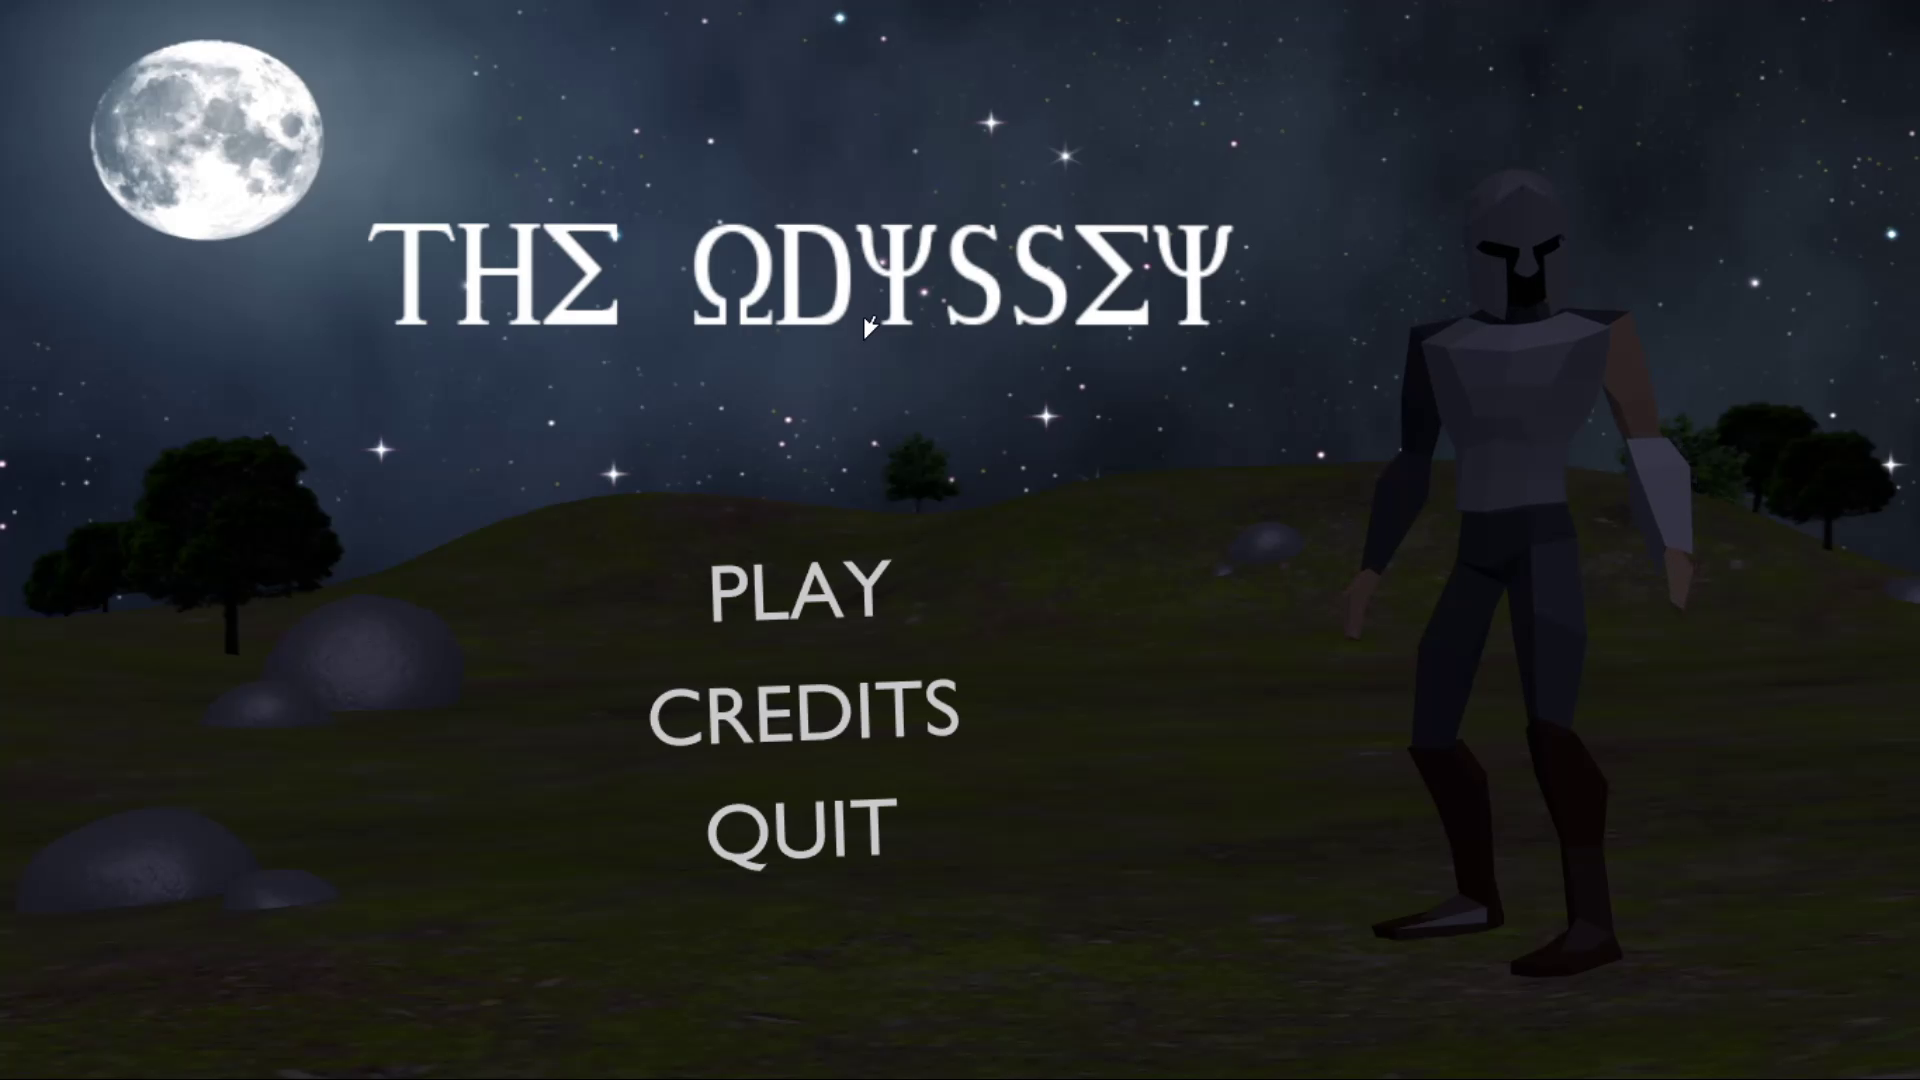 The Odyssey: The Video Game